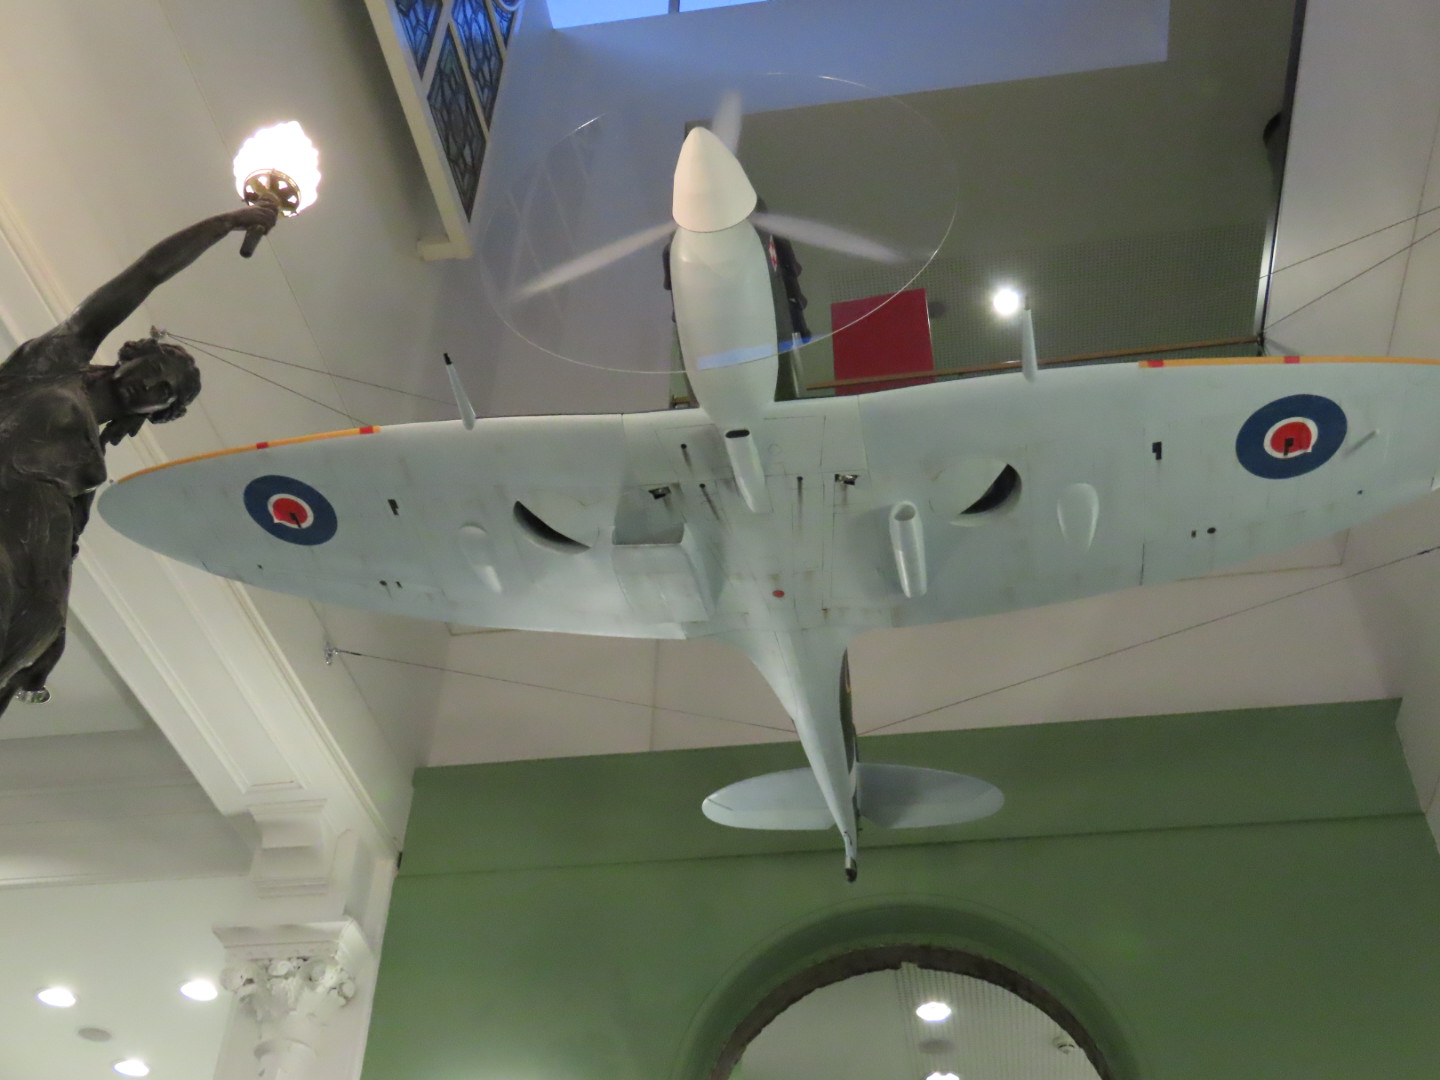 Suhail Shaikh's Spitfire sculpture at The Atkinson in Southport. Photo by Andrew Brown Media